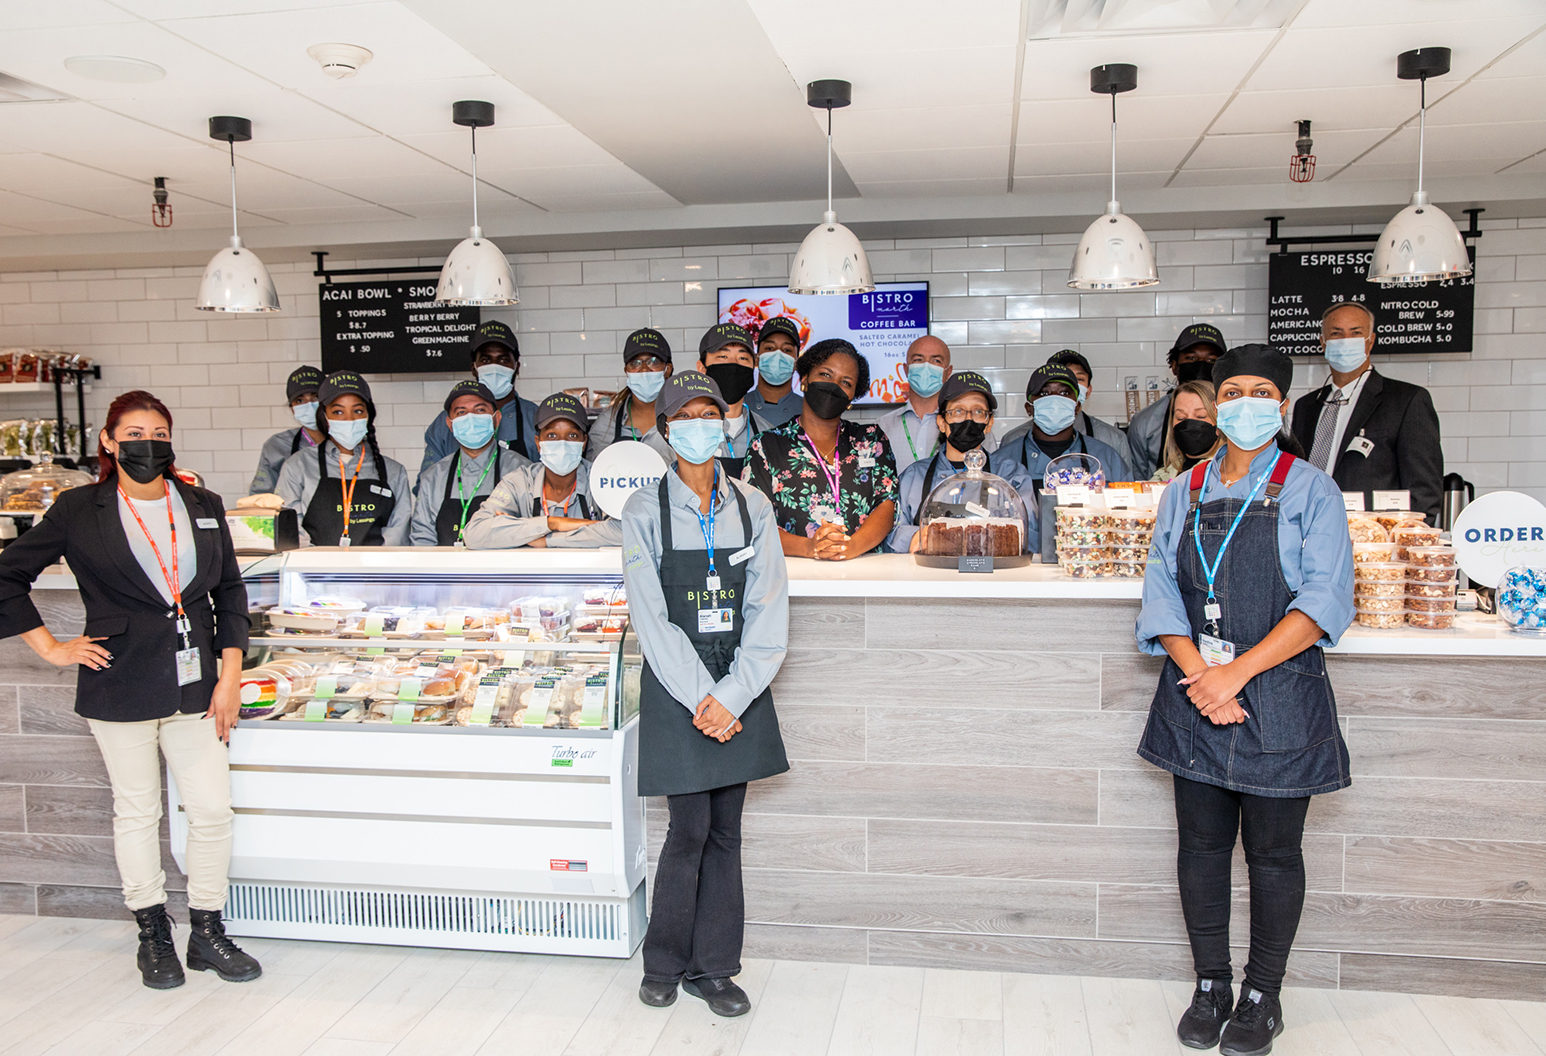 Lessing’s Hospitality Group is the new food service provider at a hospital café